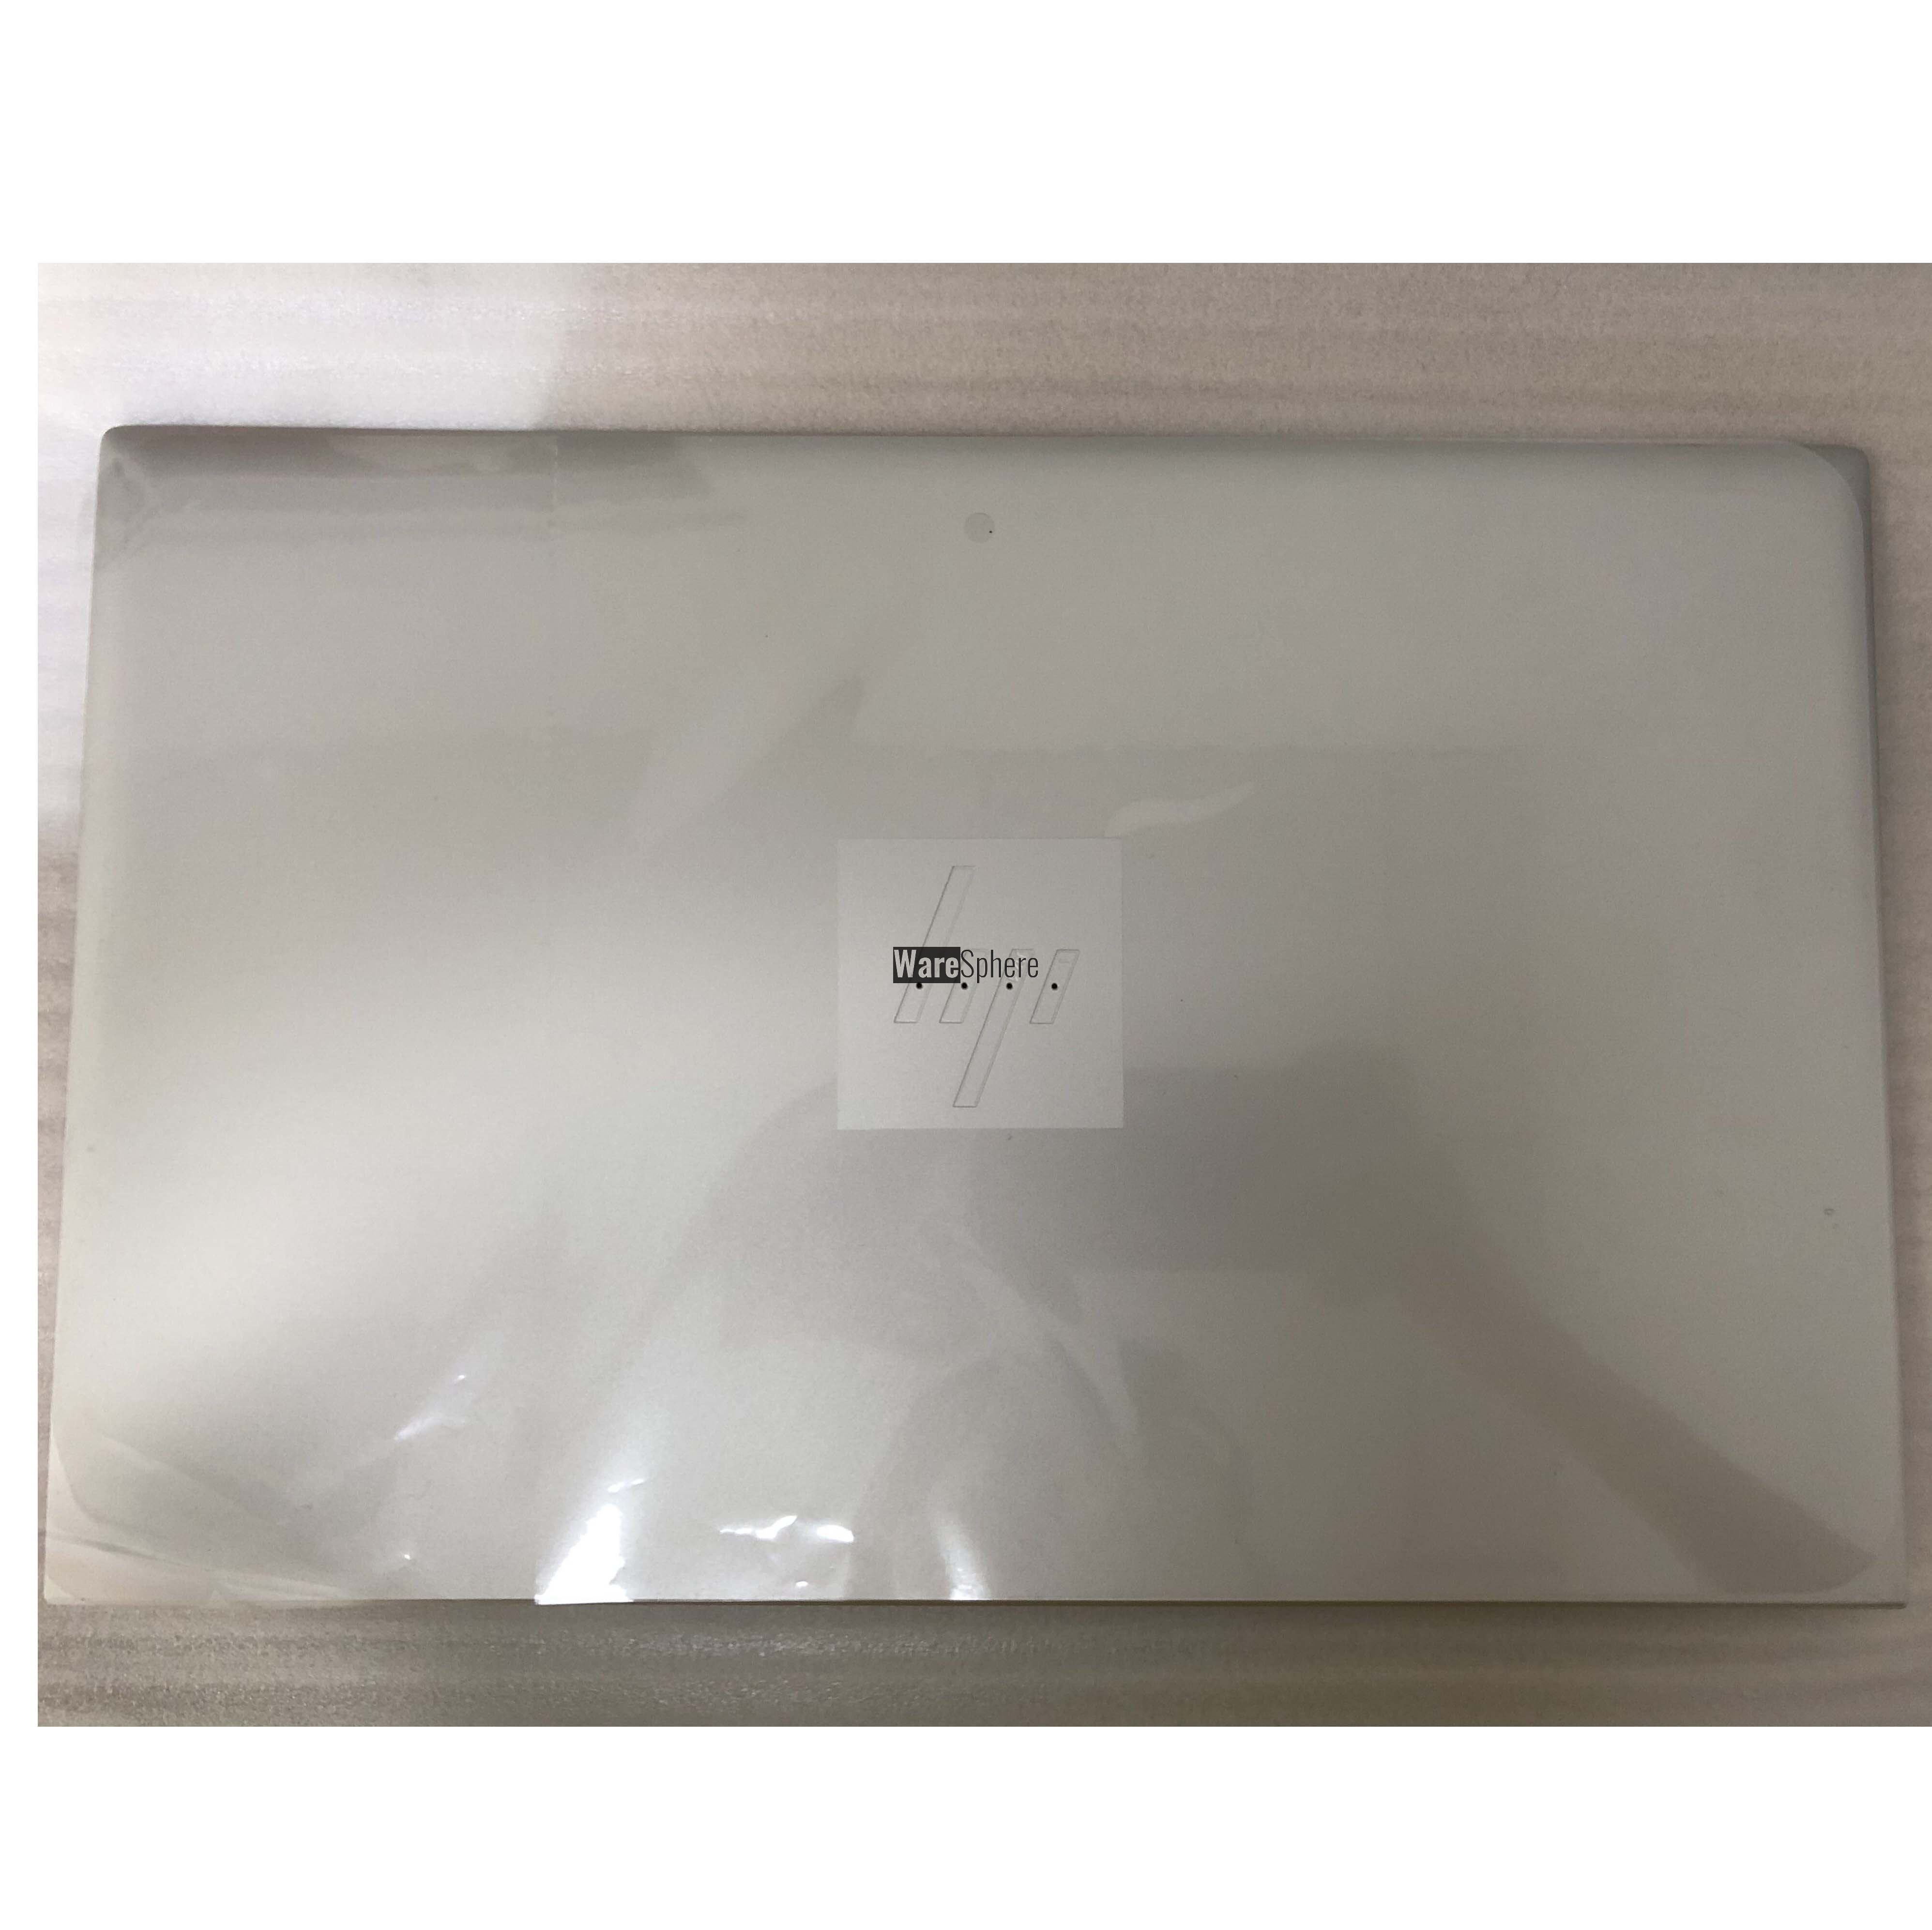 LCD Back Cover for HP ELITEBOOK 850 G7 6070B1706901 Silver